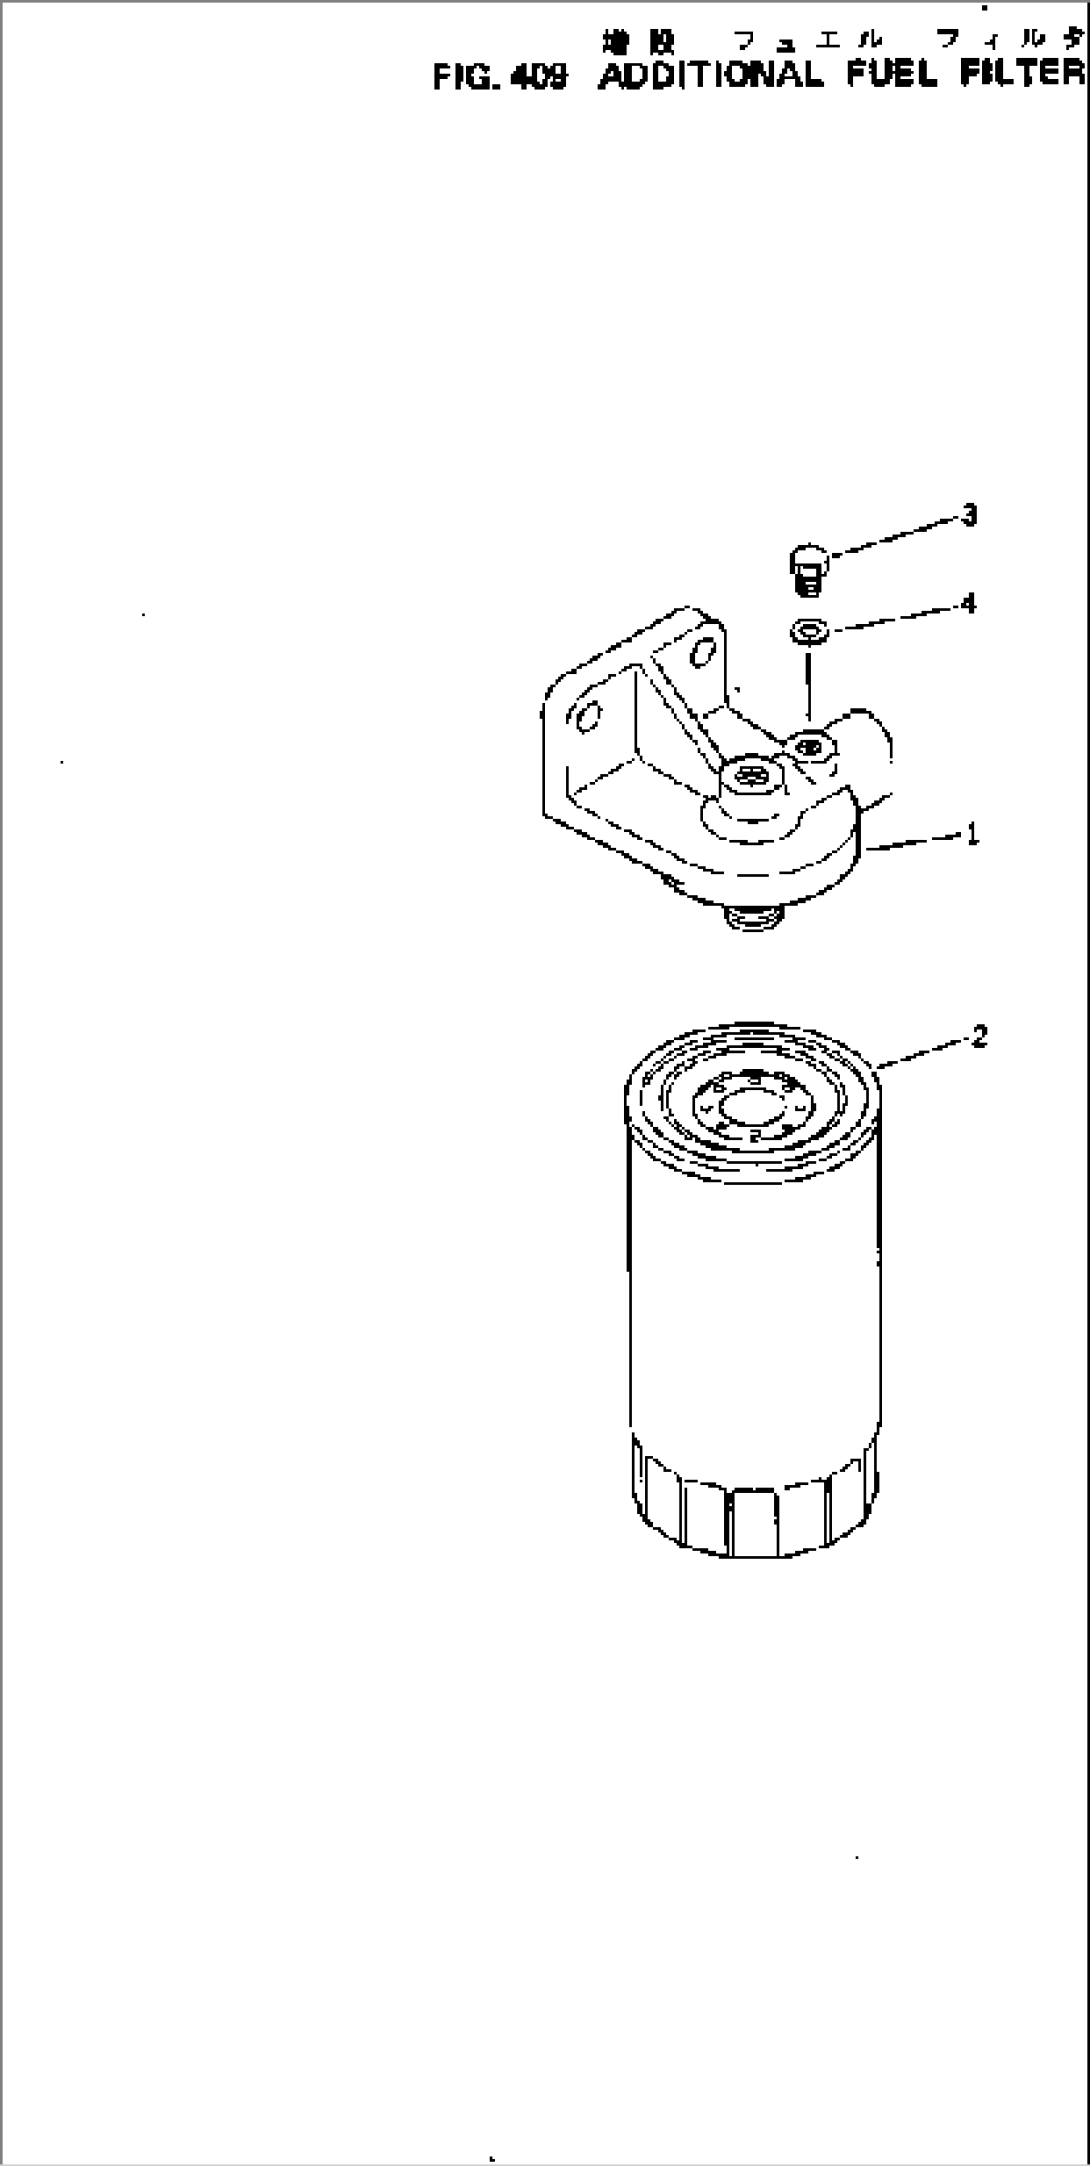 ADDITIONAL FUEL FILTER